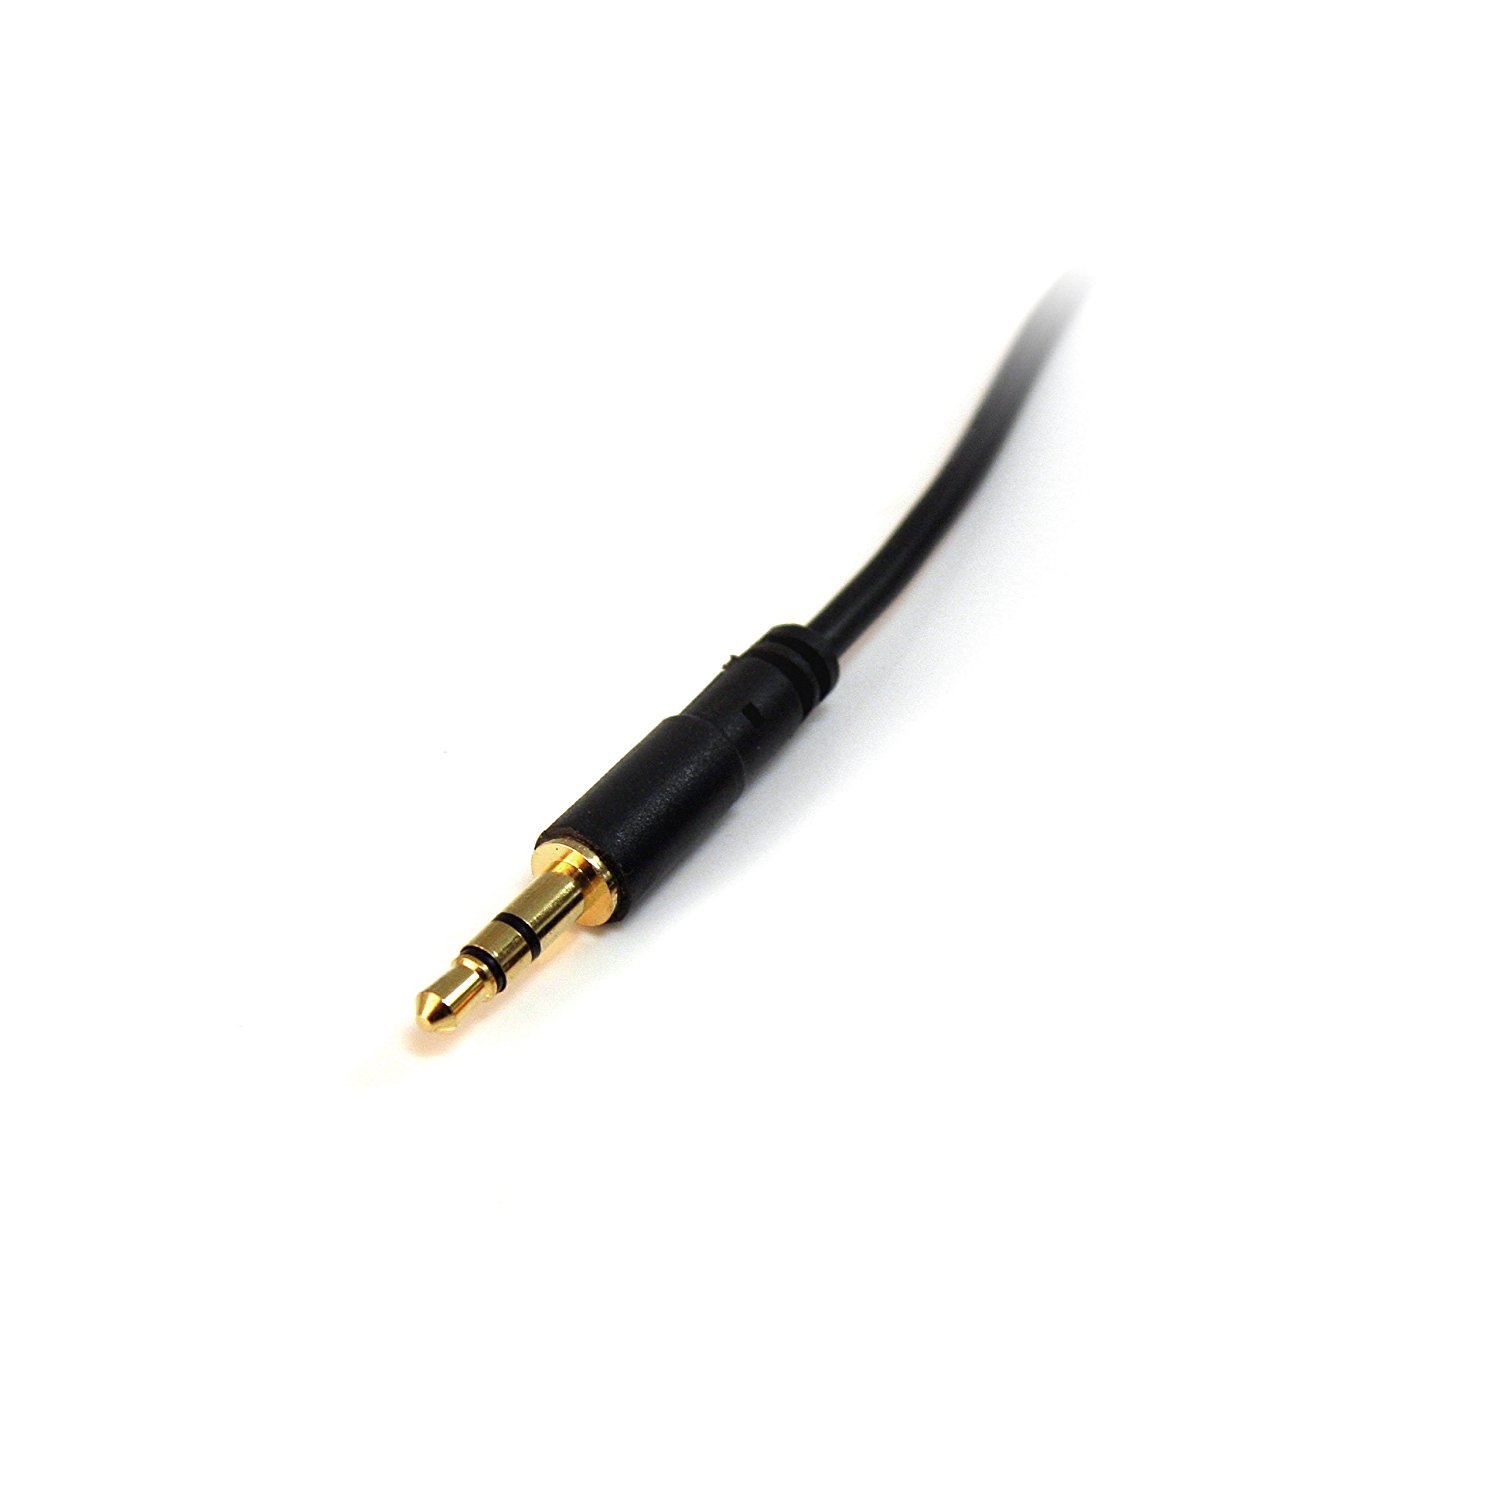 Optical Audio Cable 3.3ft, 6ft, 10ft, 15ft, 20ft